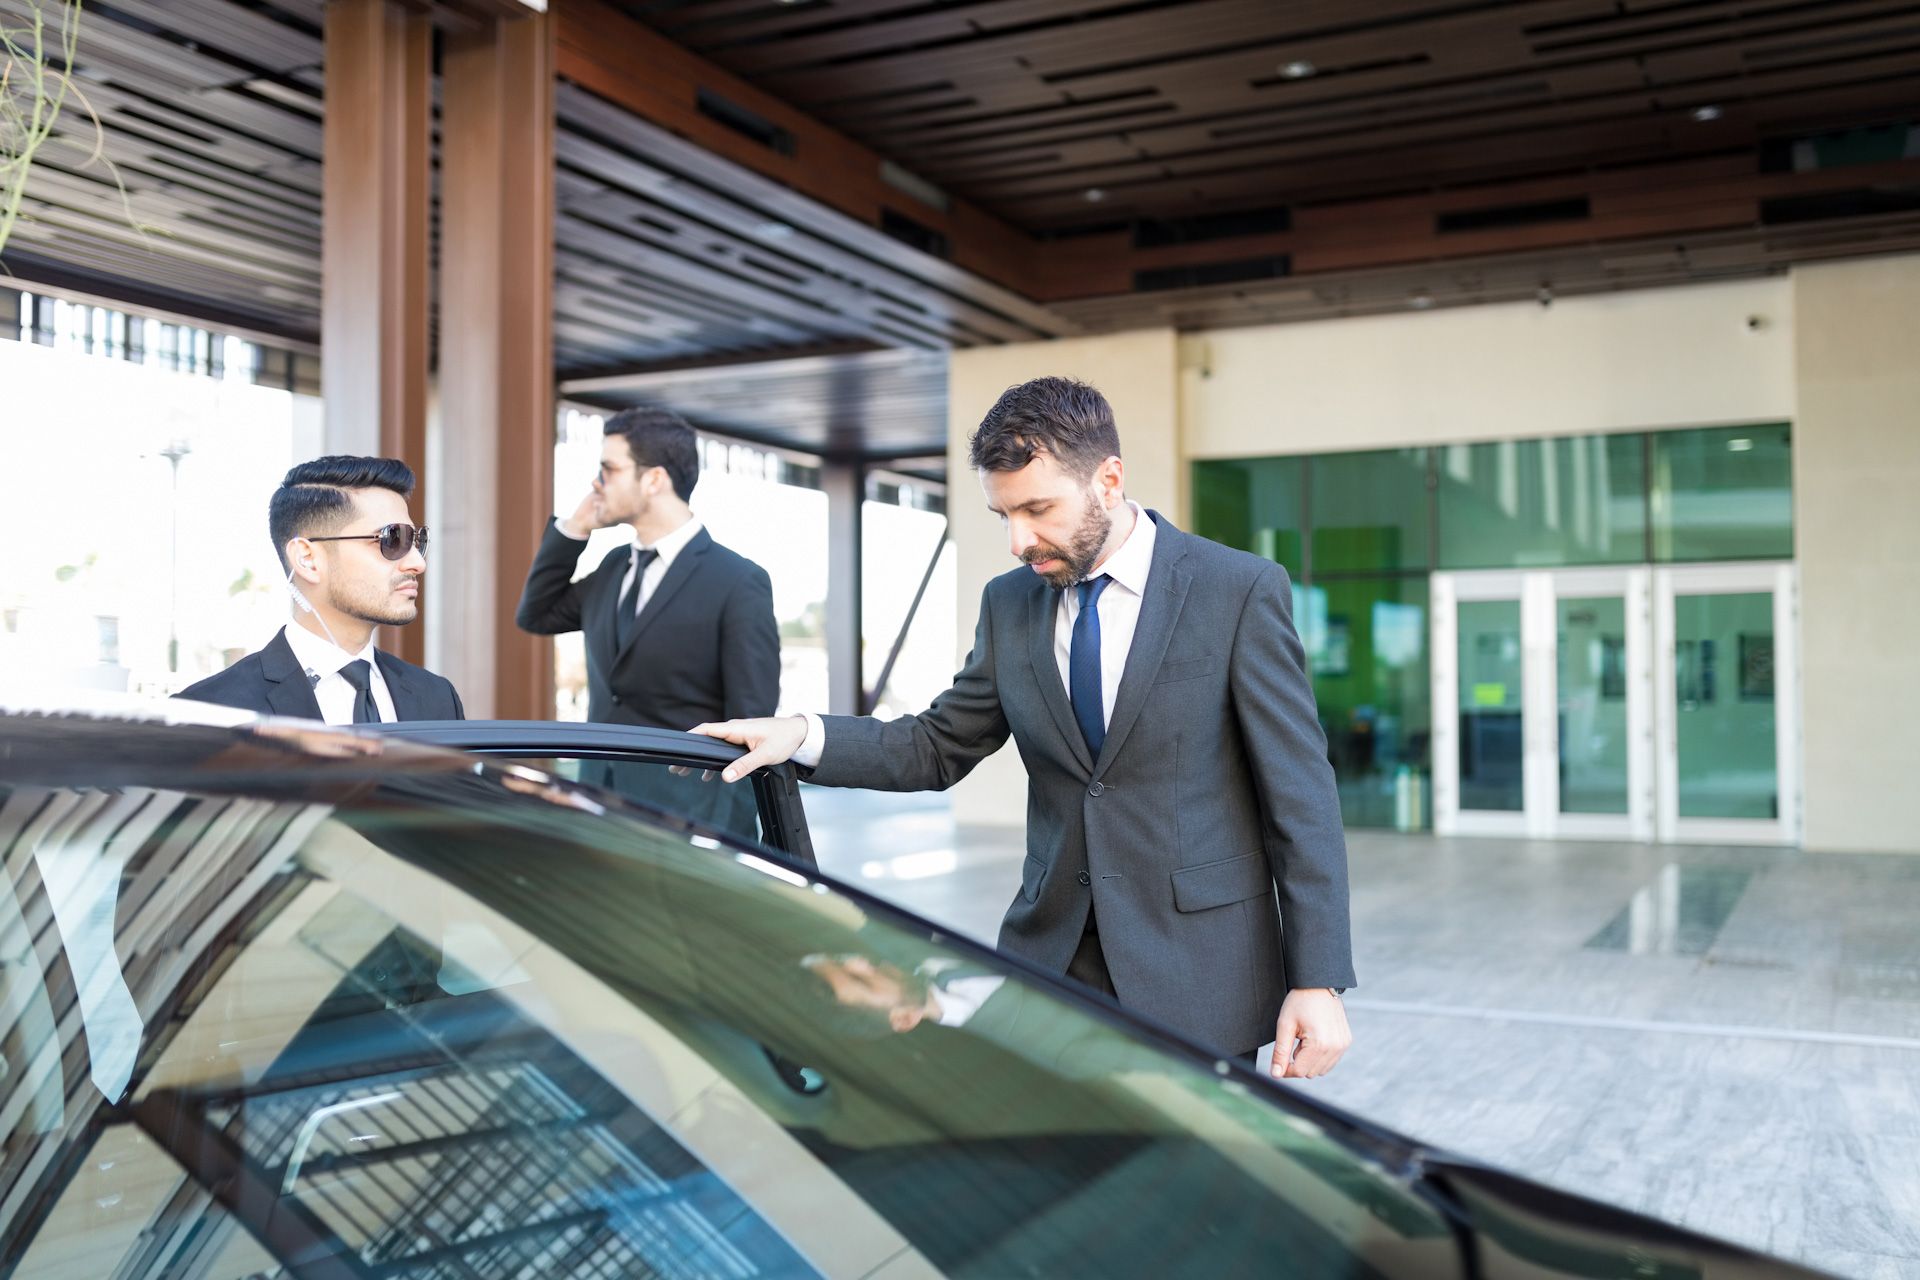 A man in a suit and tie is standing next to a car.